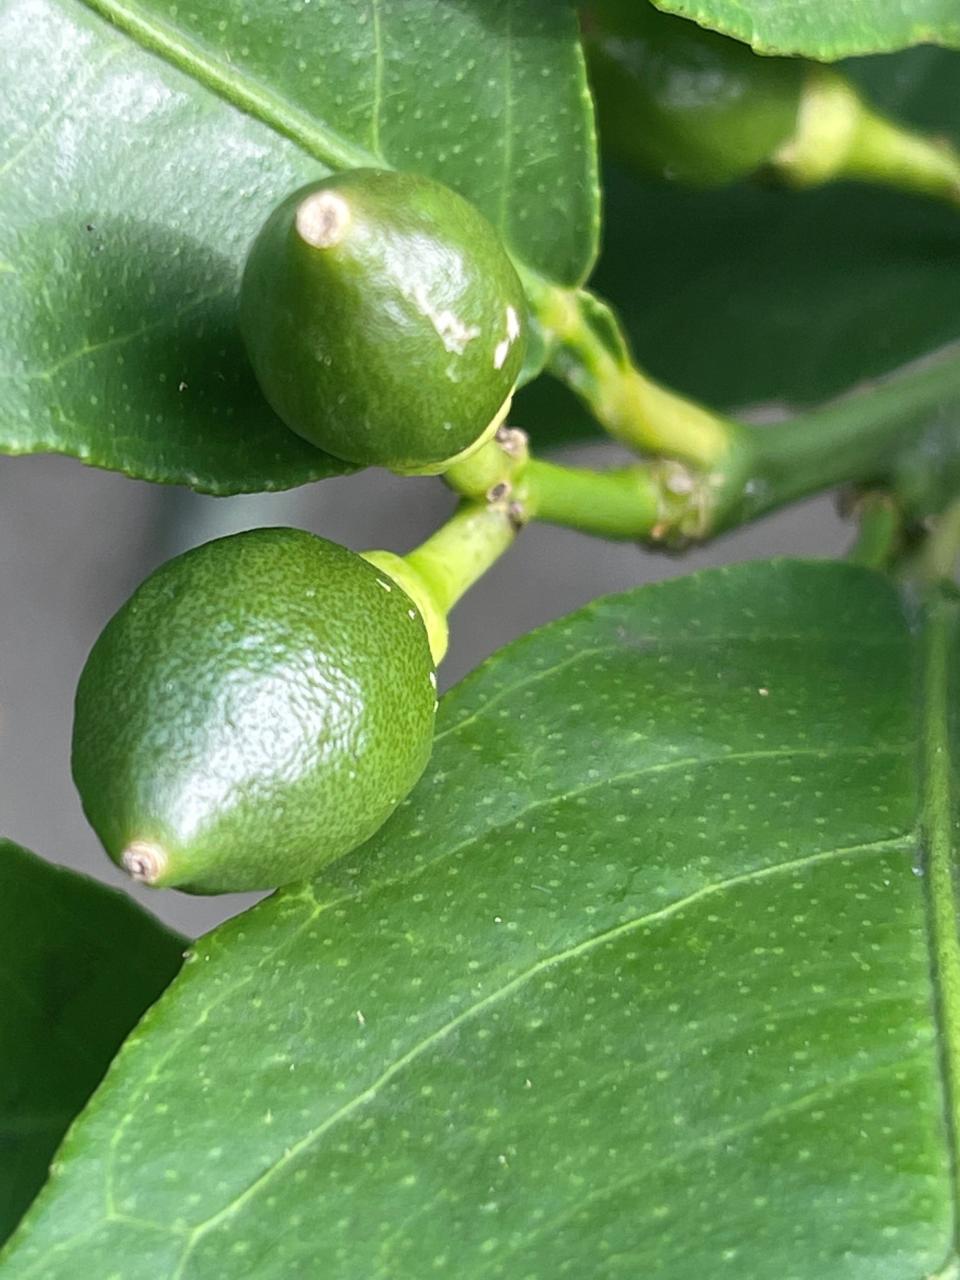 Meyer lemons look like tiny limes when they first appear on the potted tree.